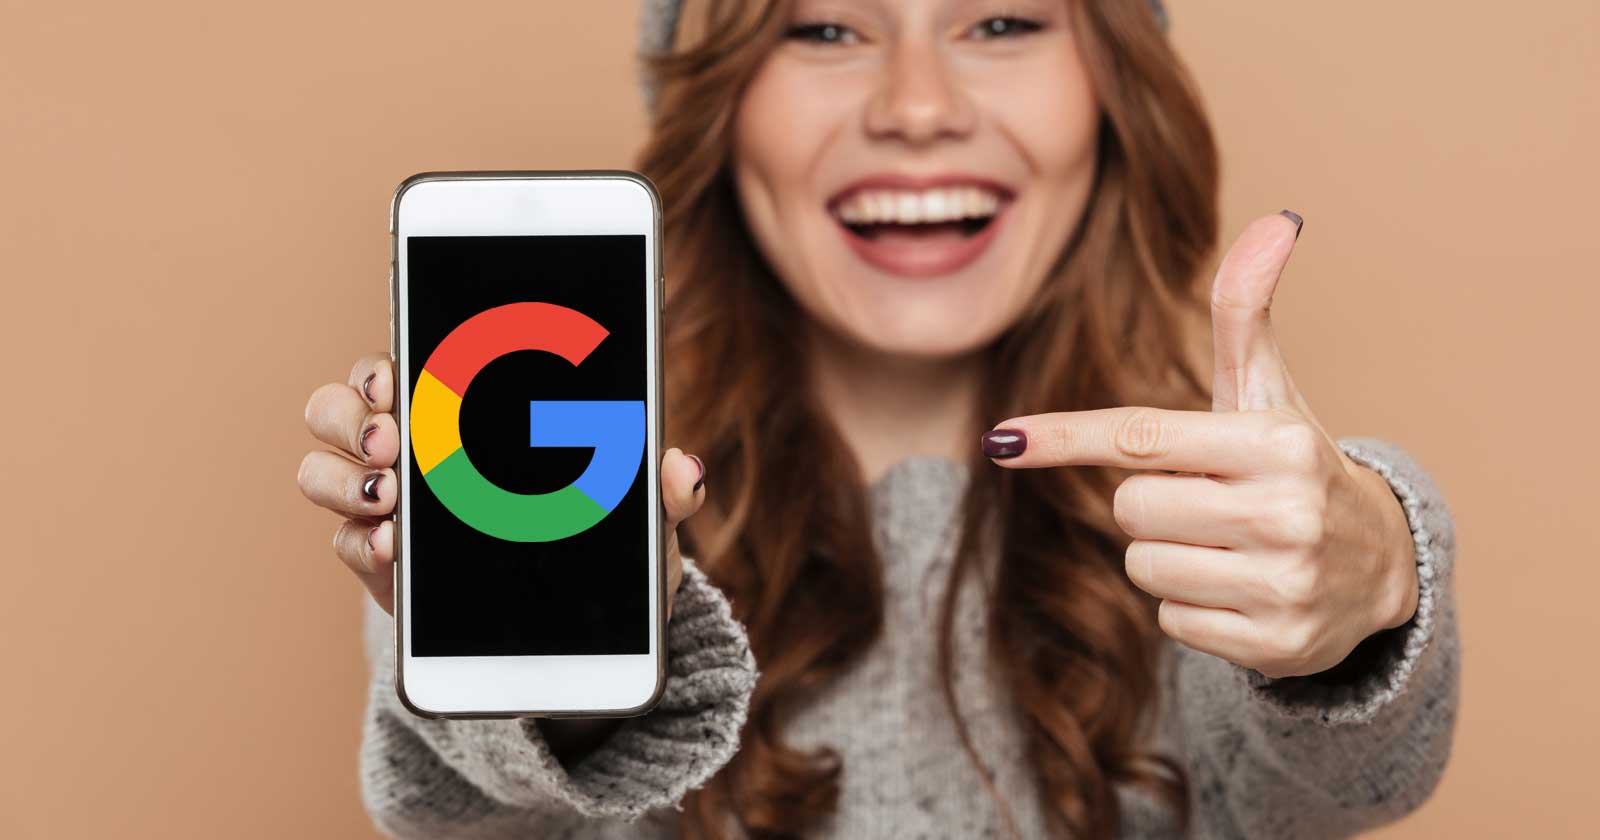 Image of a woman holding a phone that displays Google's logo